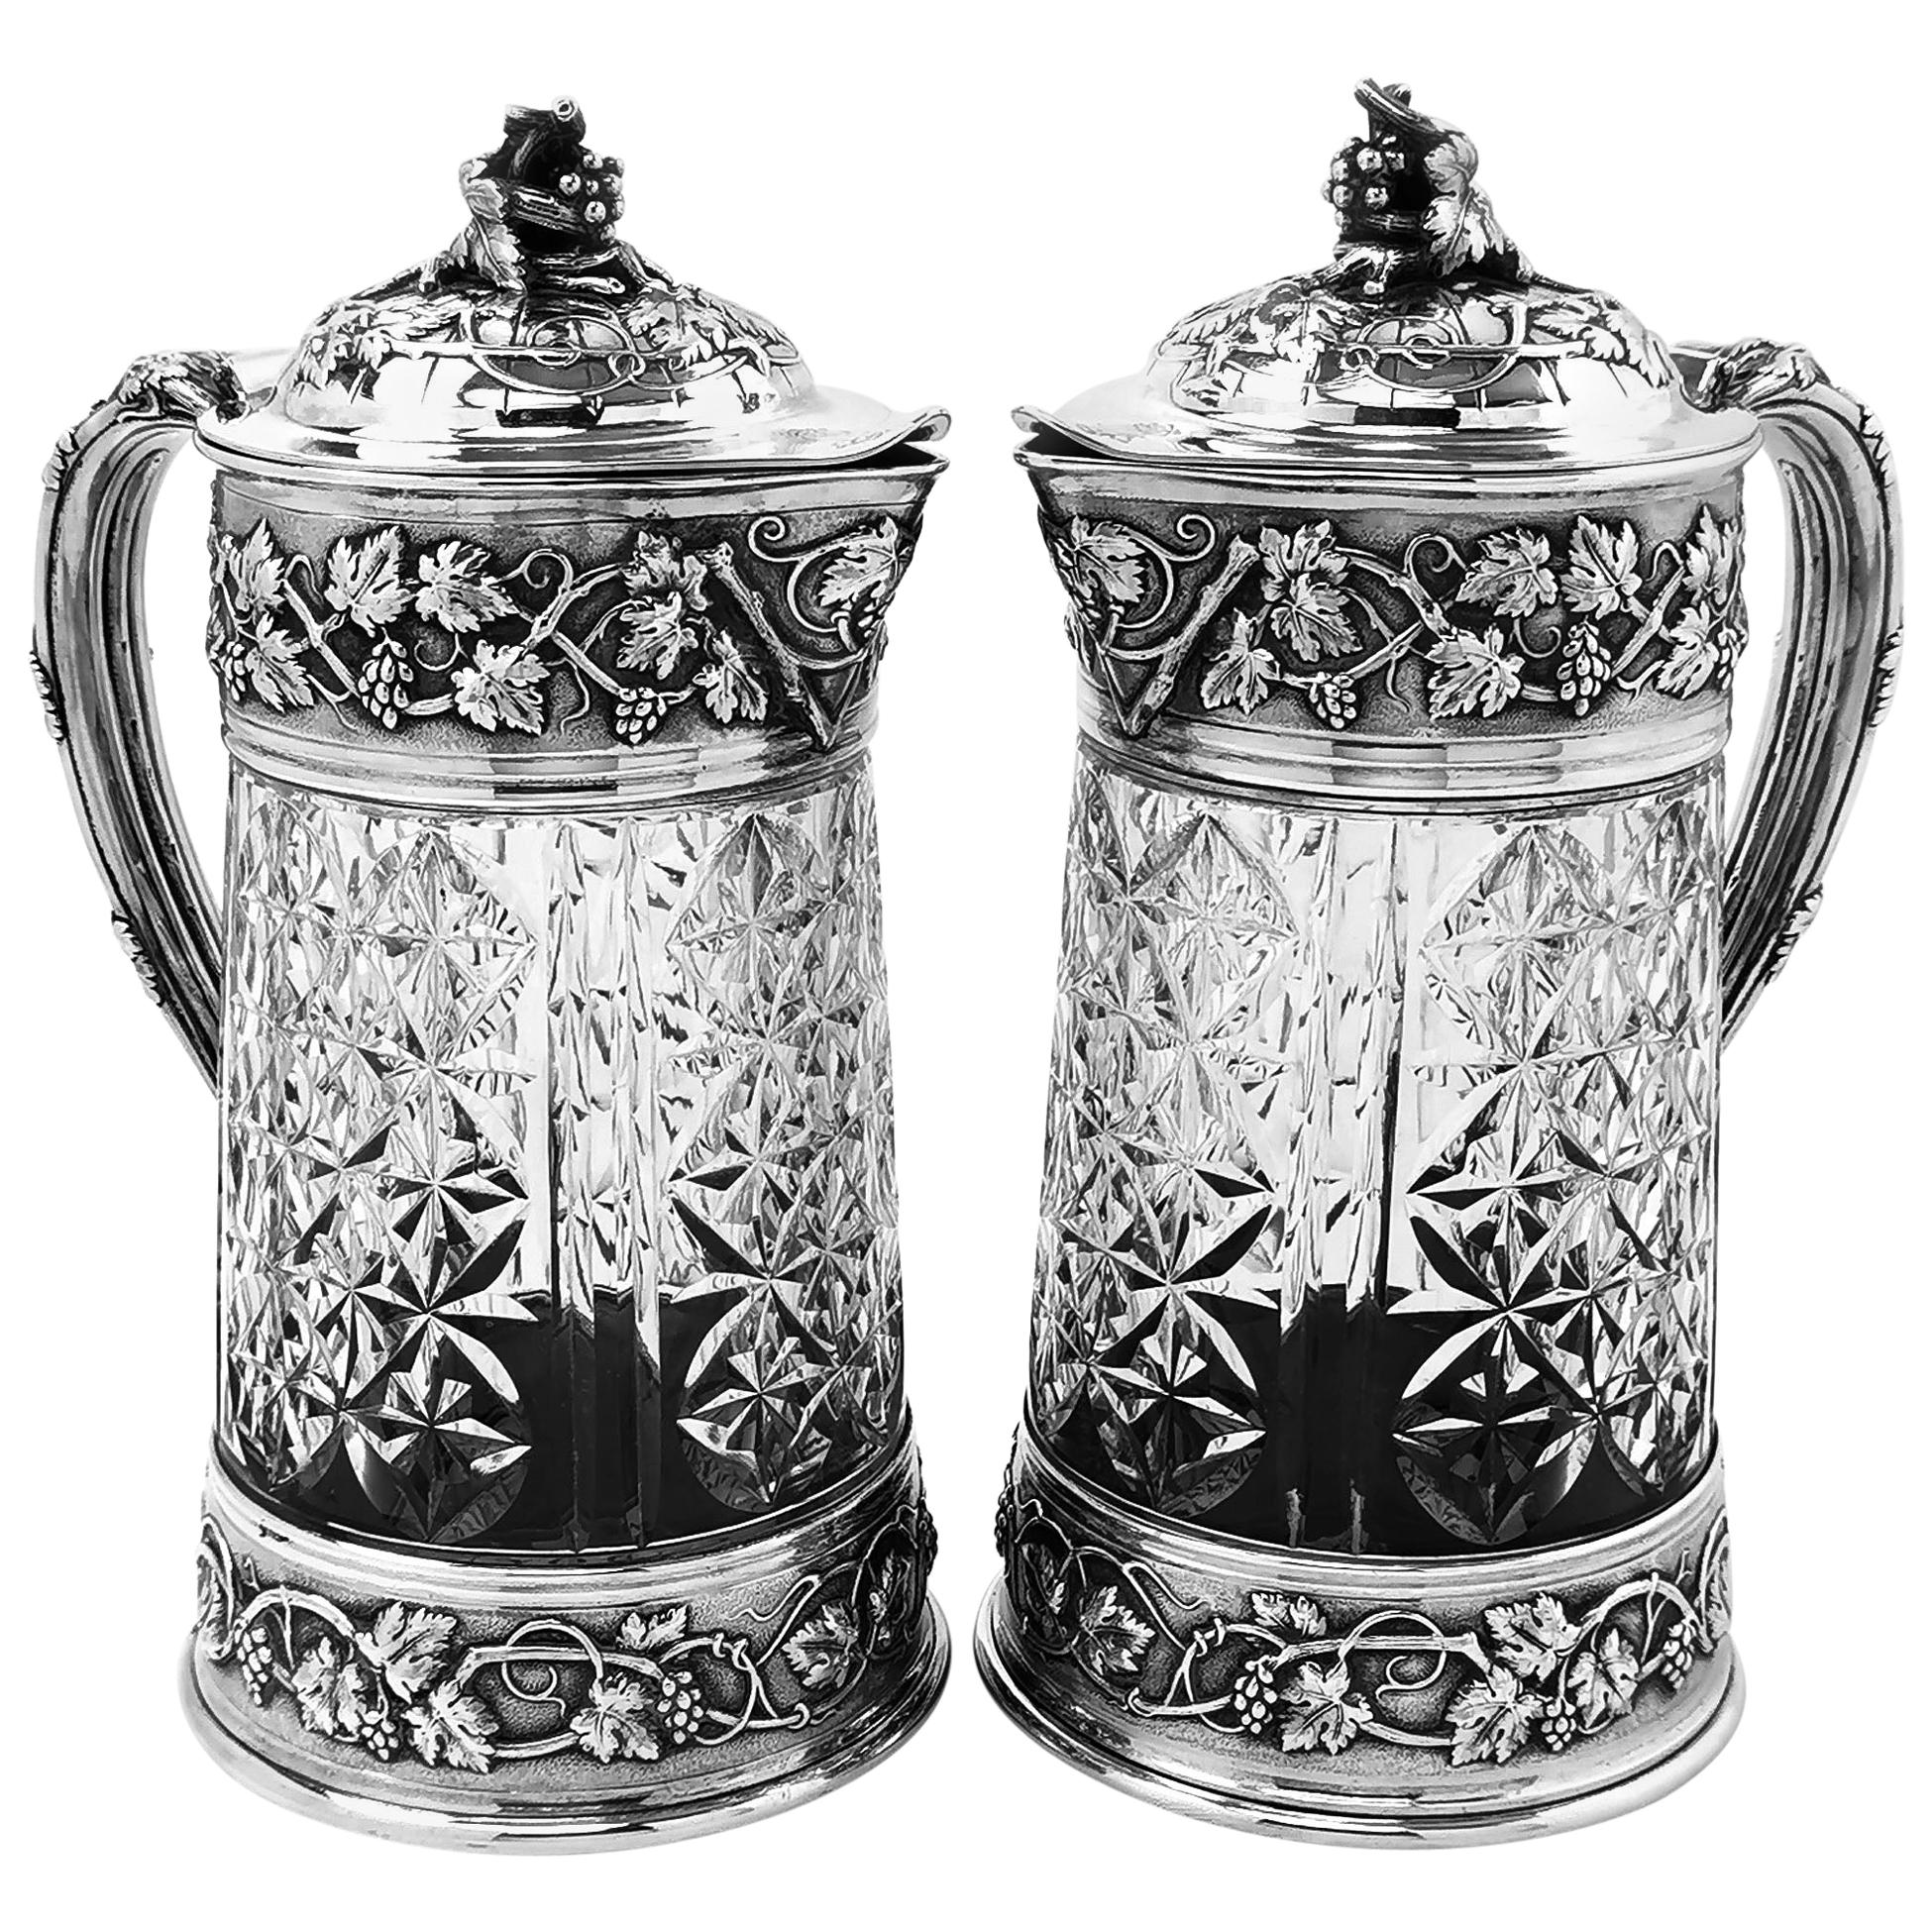 Pair of Antique French Silver and Glass Claret Jugs / Wine Decanters Odiot c1870